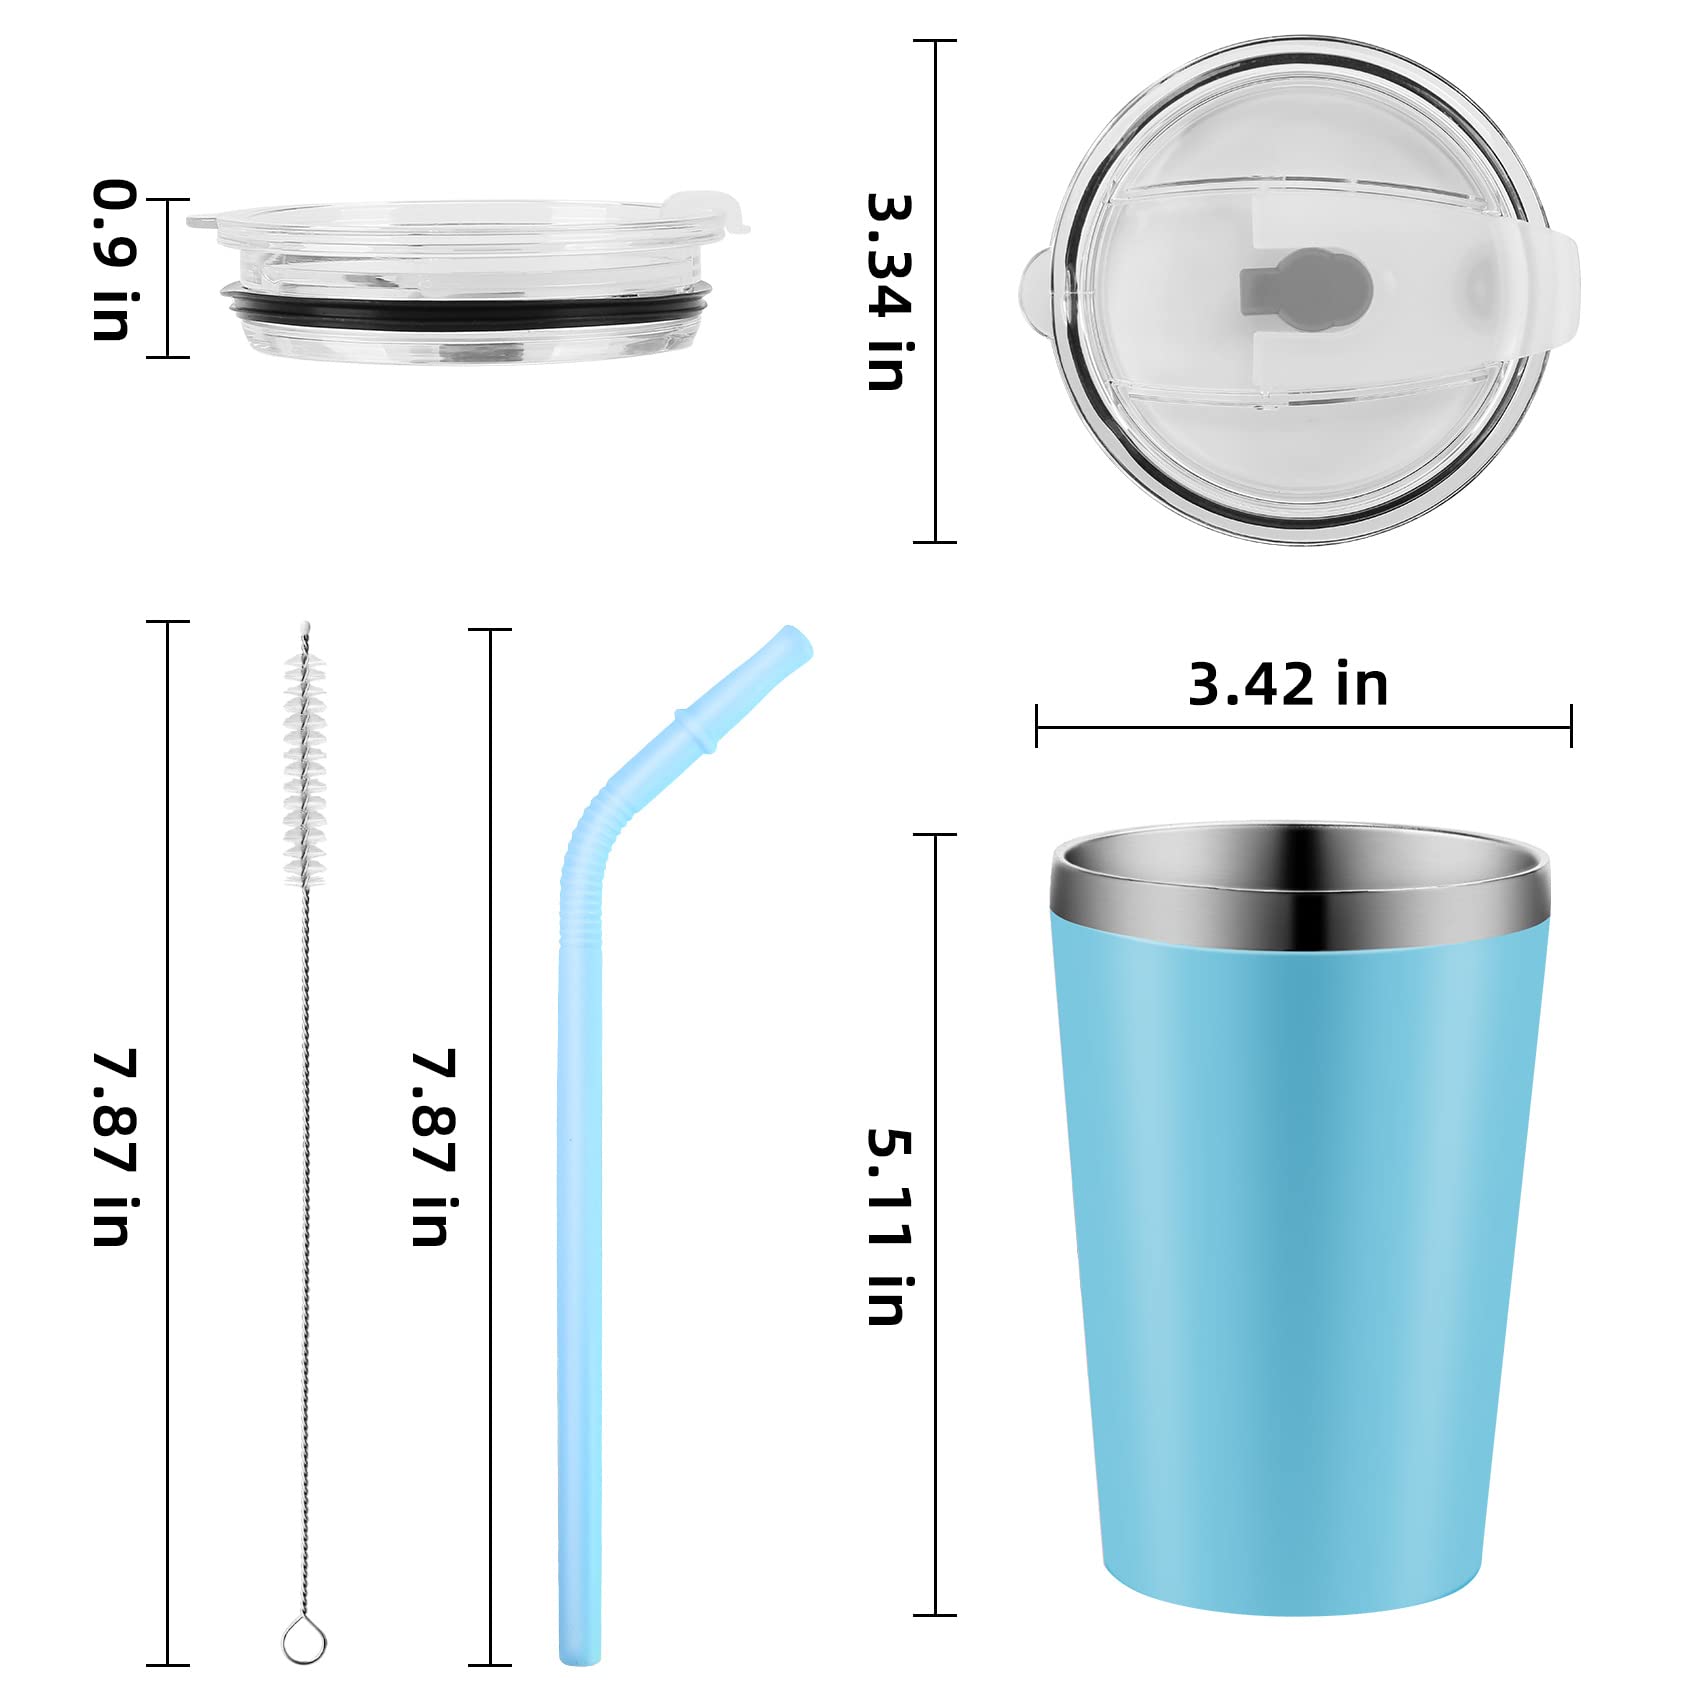 Rommeka Kids Stainless Steel Tumblers with Lids and Straws - 12oz Double Wall Spill Proof Insulated Cup, Reusable Drinking Smoothie Toddler Sippy Cups for Boys and Girls, 4 Pack